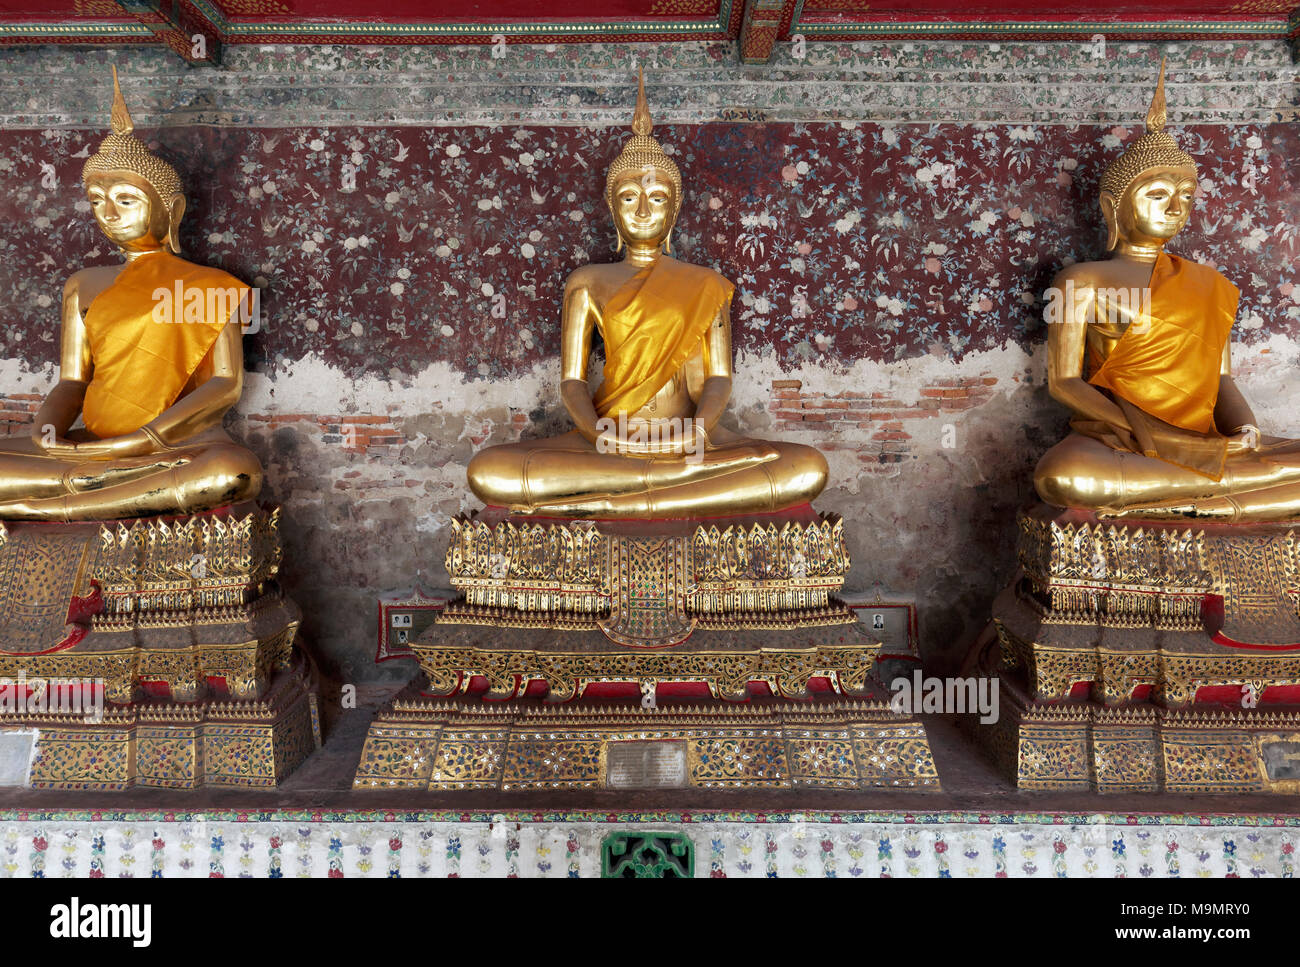 Wall with golden Buddha statues in meditation posture, on decorated pedestals, Phra Rabieng Kot, Wat Suhtat, royal temple Stock Photo